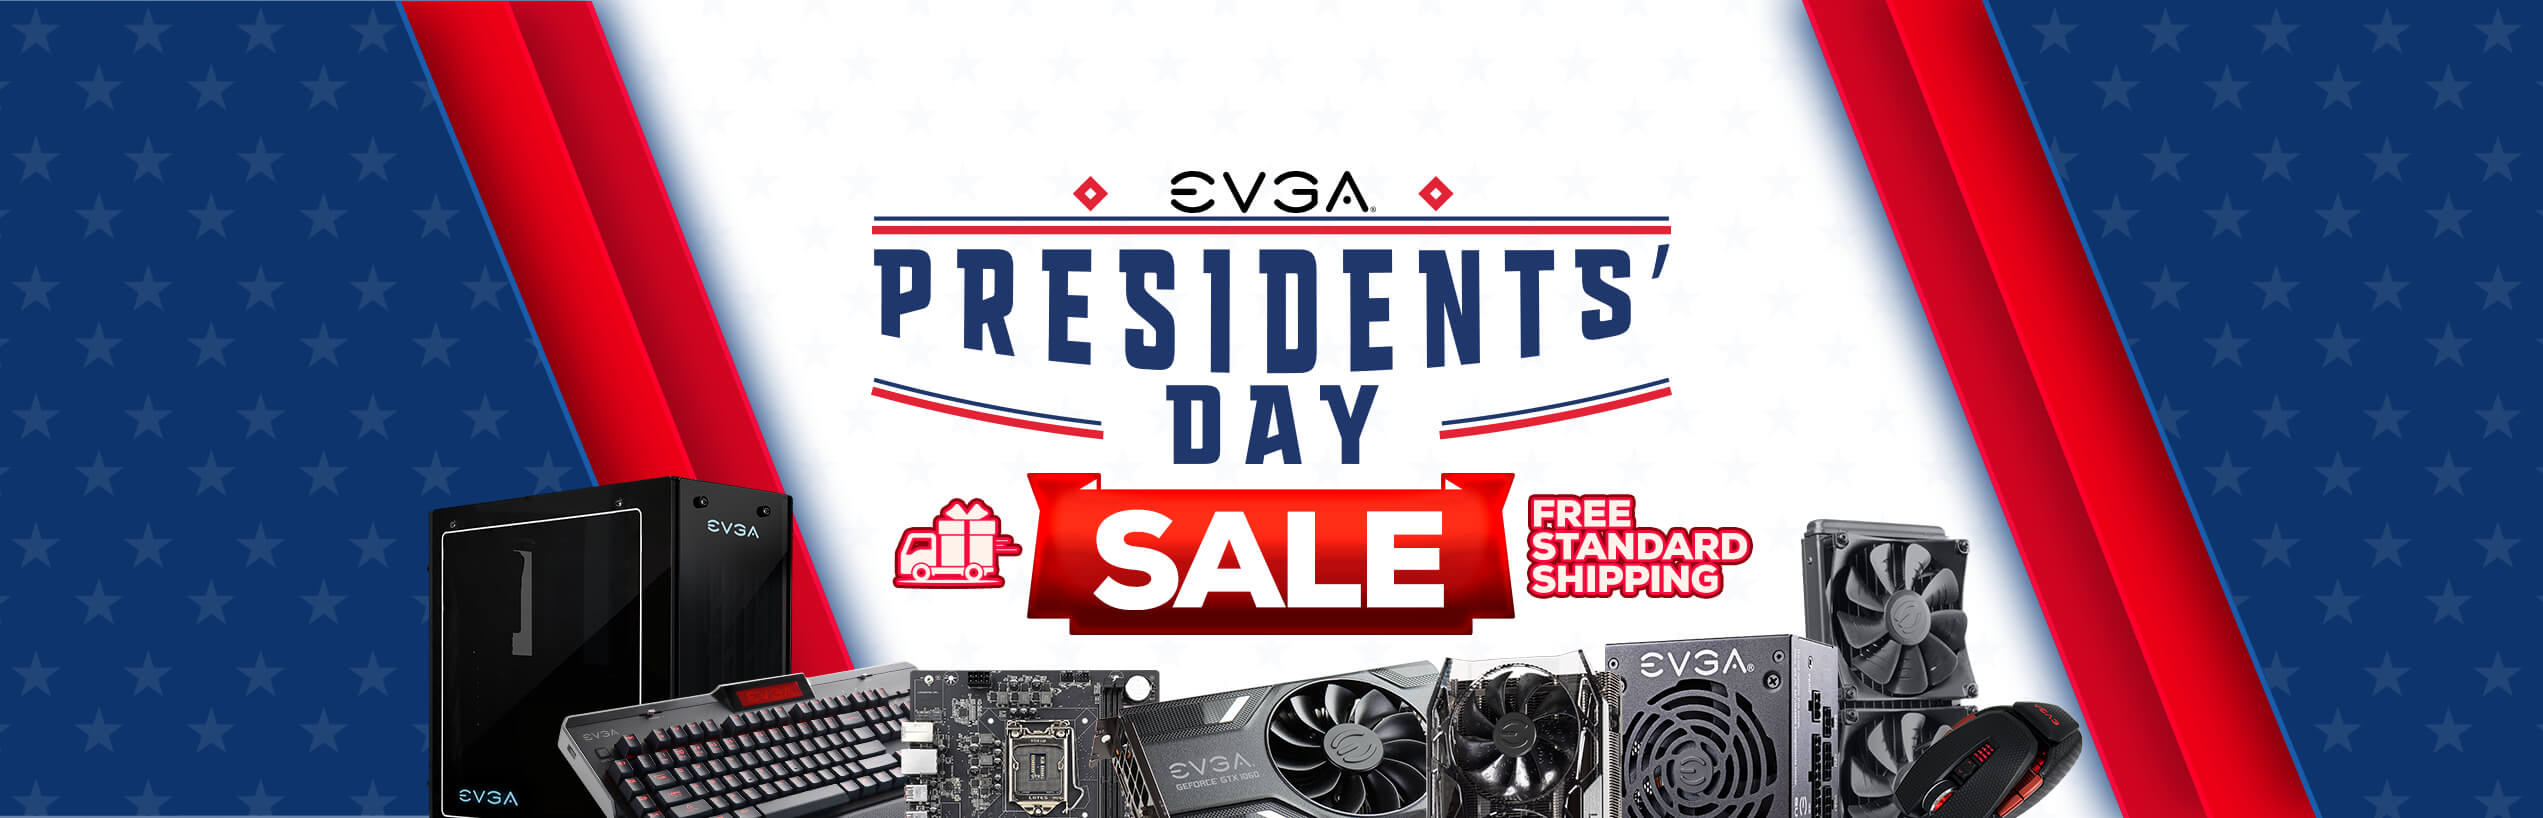 The EVGA Presidents day sale